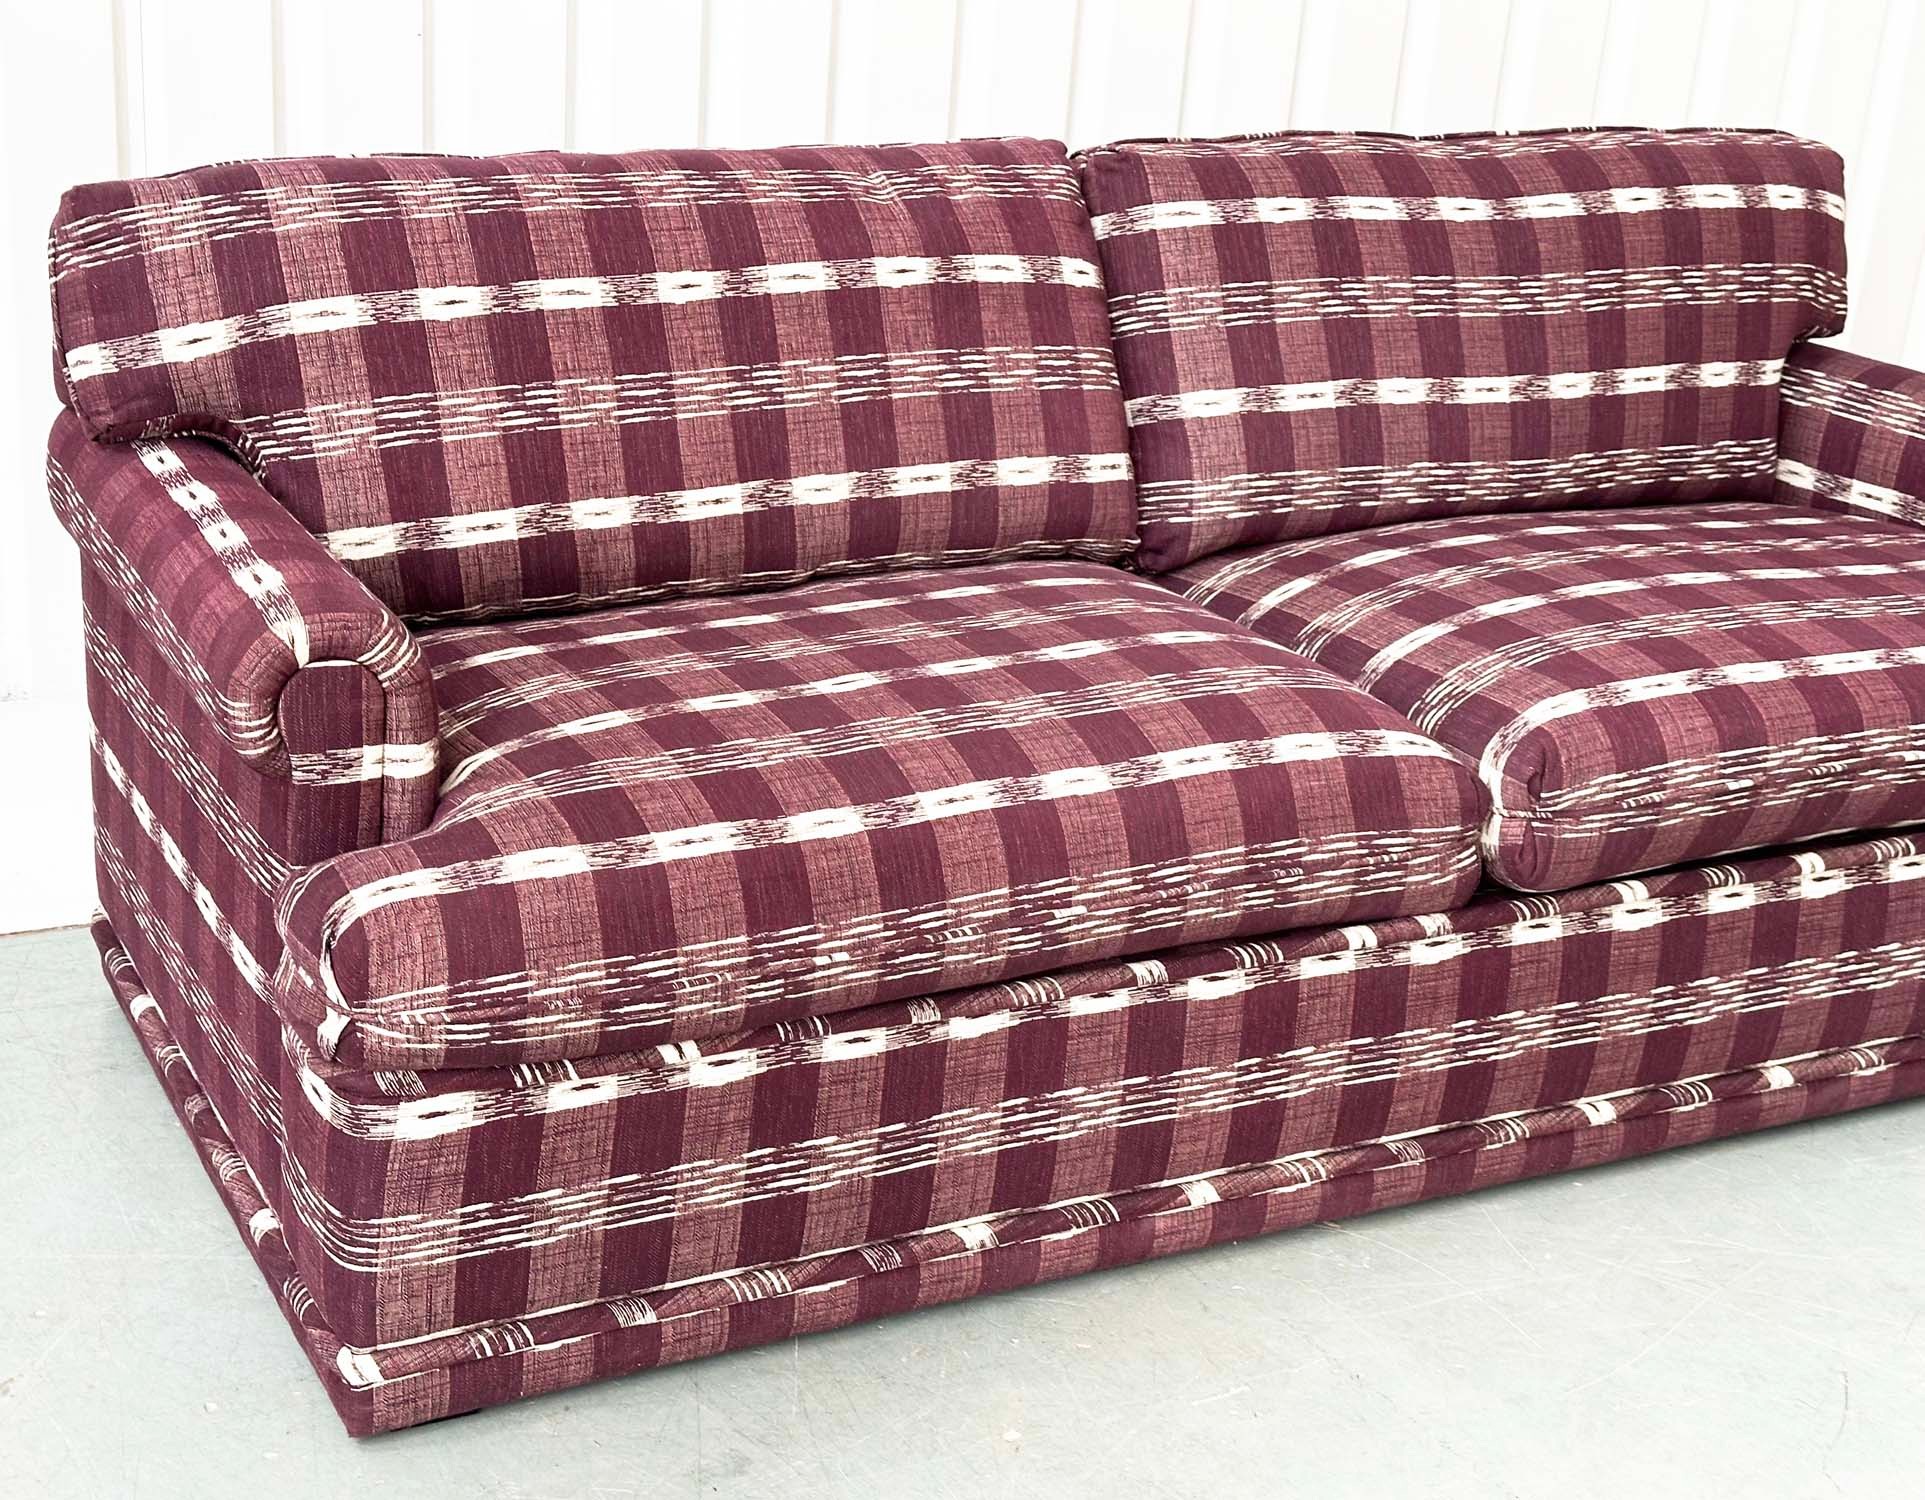 SOFA, Swedish check purple/white upholstery with scroll arms, 203cm W. - Image 12 of 18